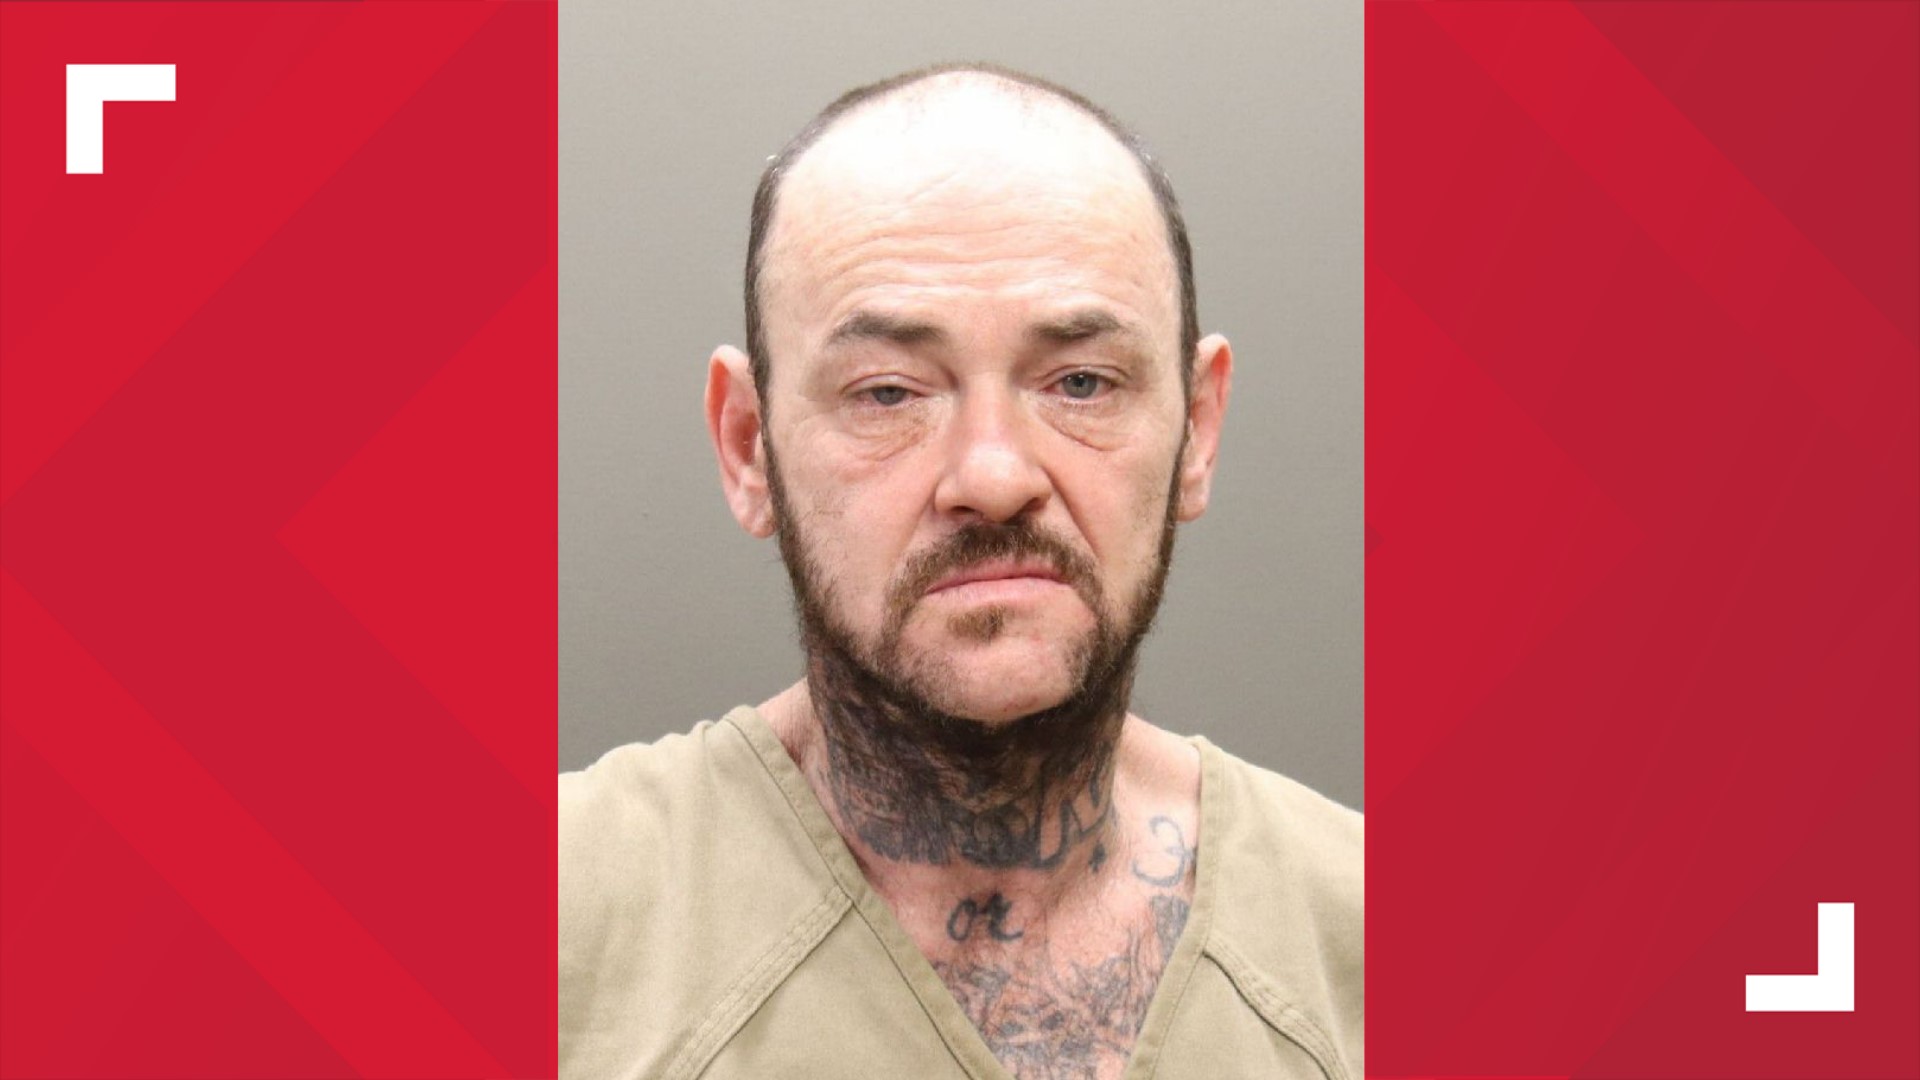 Police said officers arrested 49-year-old Richard Schoonover in the area of Alkire and Demorest roads on the city's southwest side.